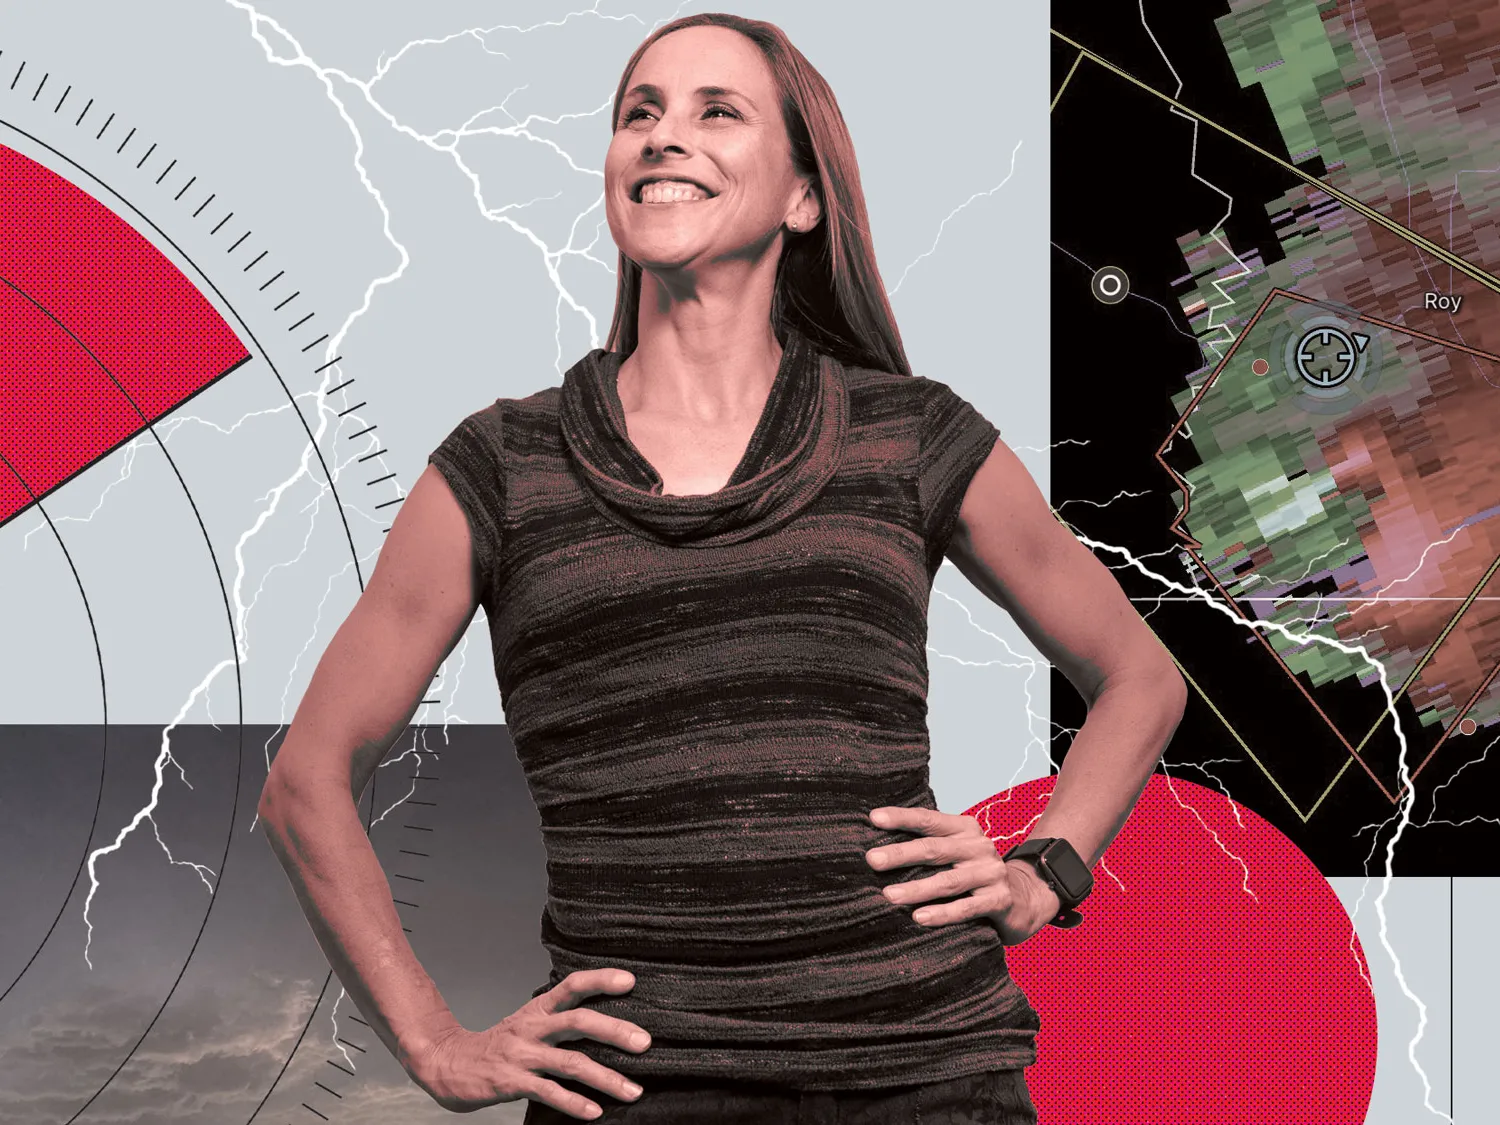 Jana Houser, a white woman with her straight hair pushed behind her shoulders, grins as she looks up and stands confidently with her hands on hips. In an illustrated background to her image are radar images and photos of storms, colored in shades of Ohio State’s scarlet and gray. 